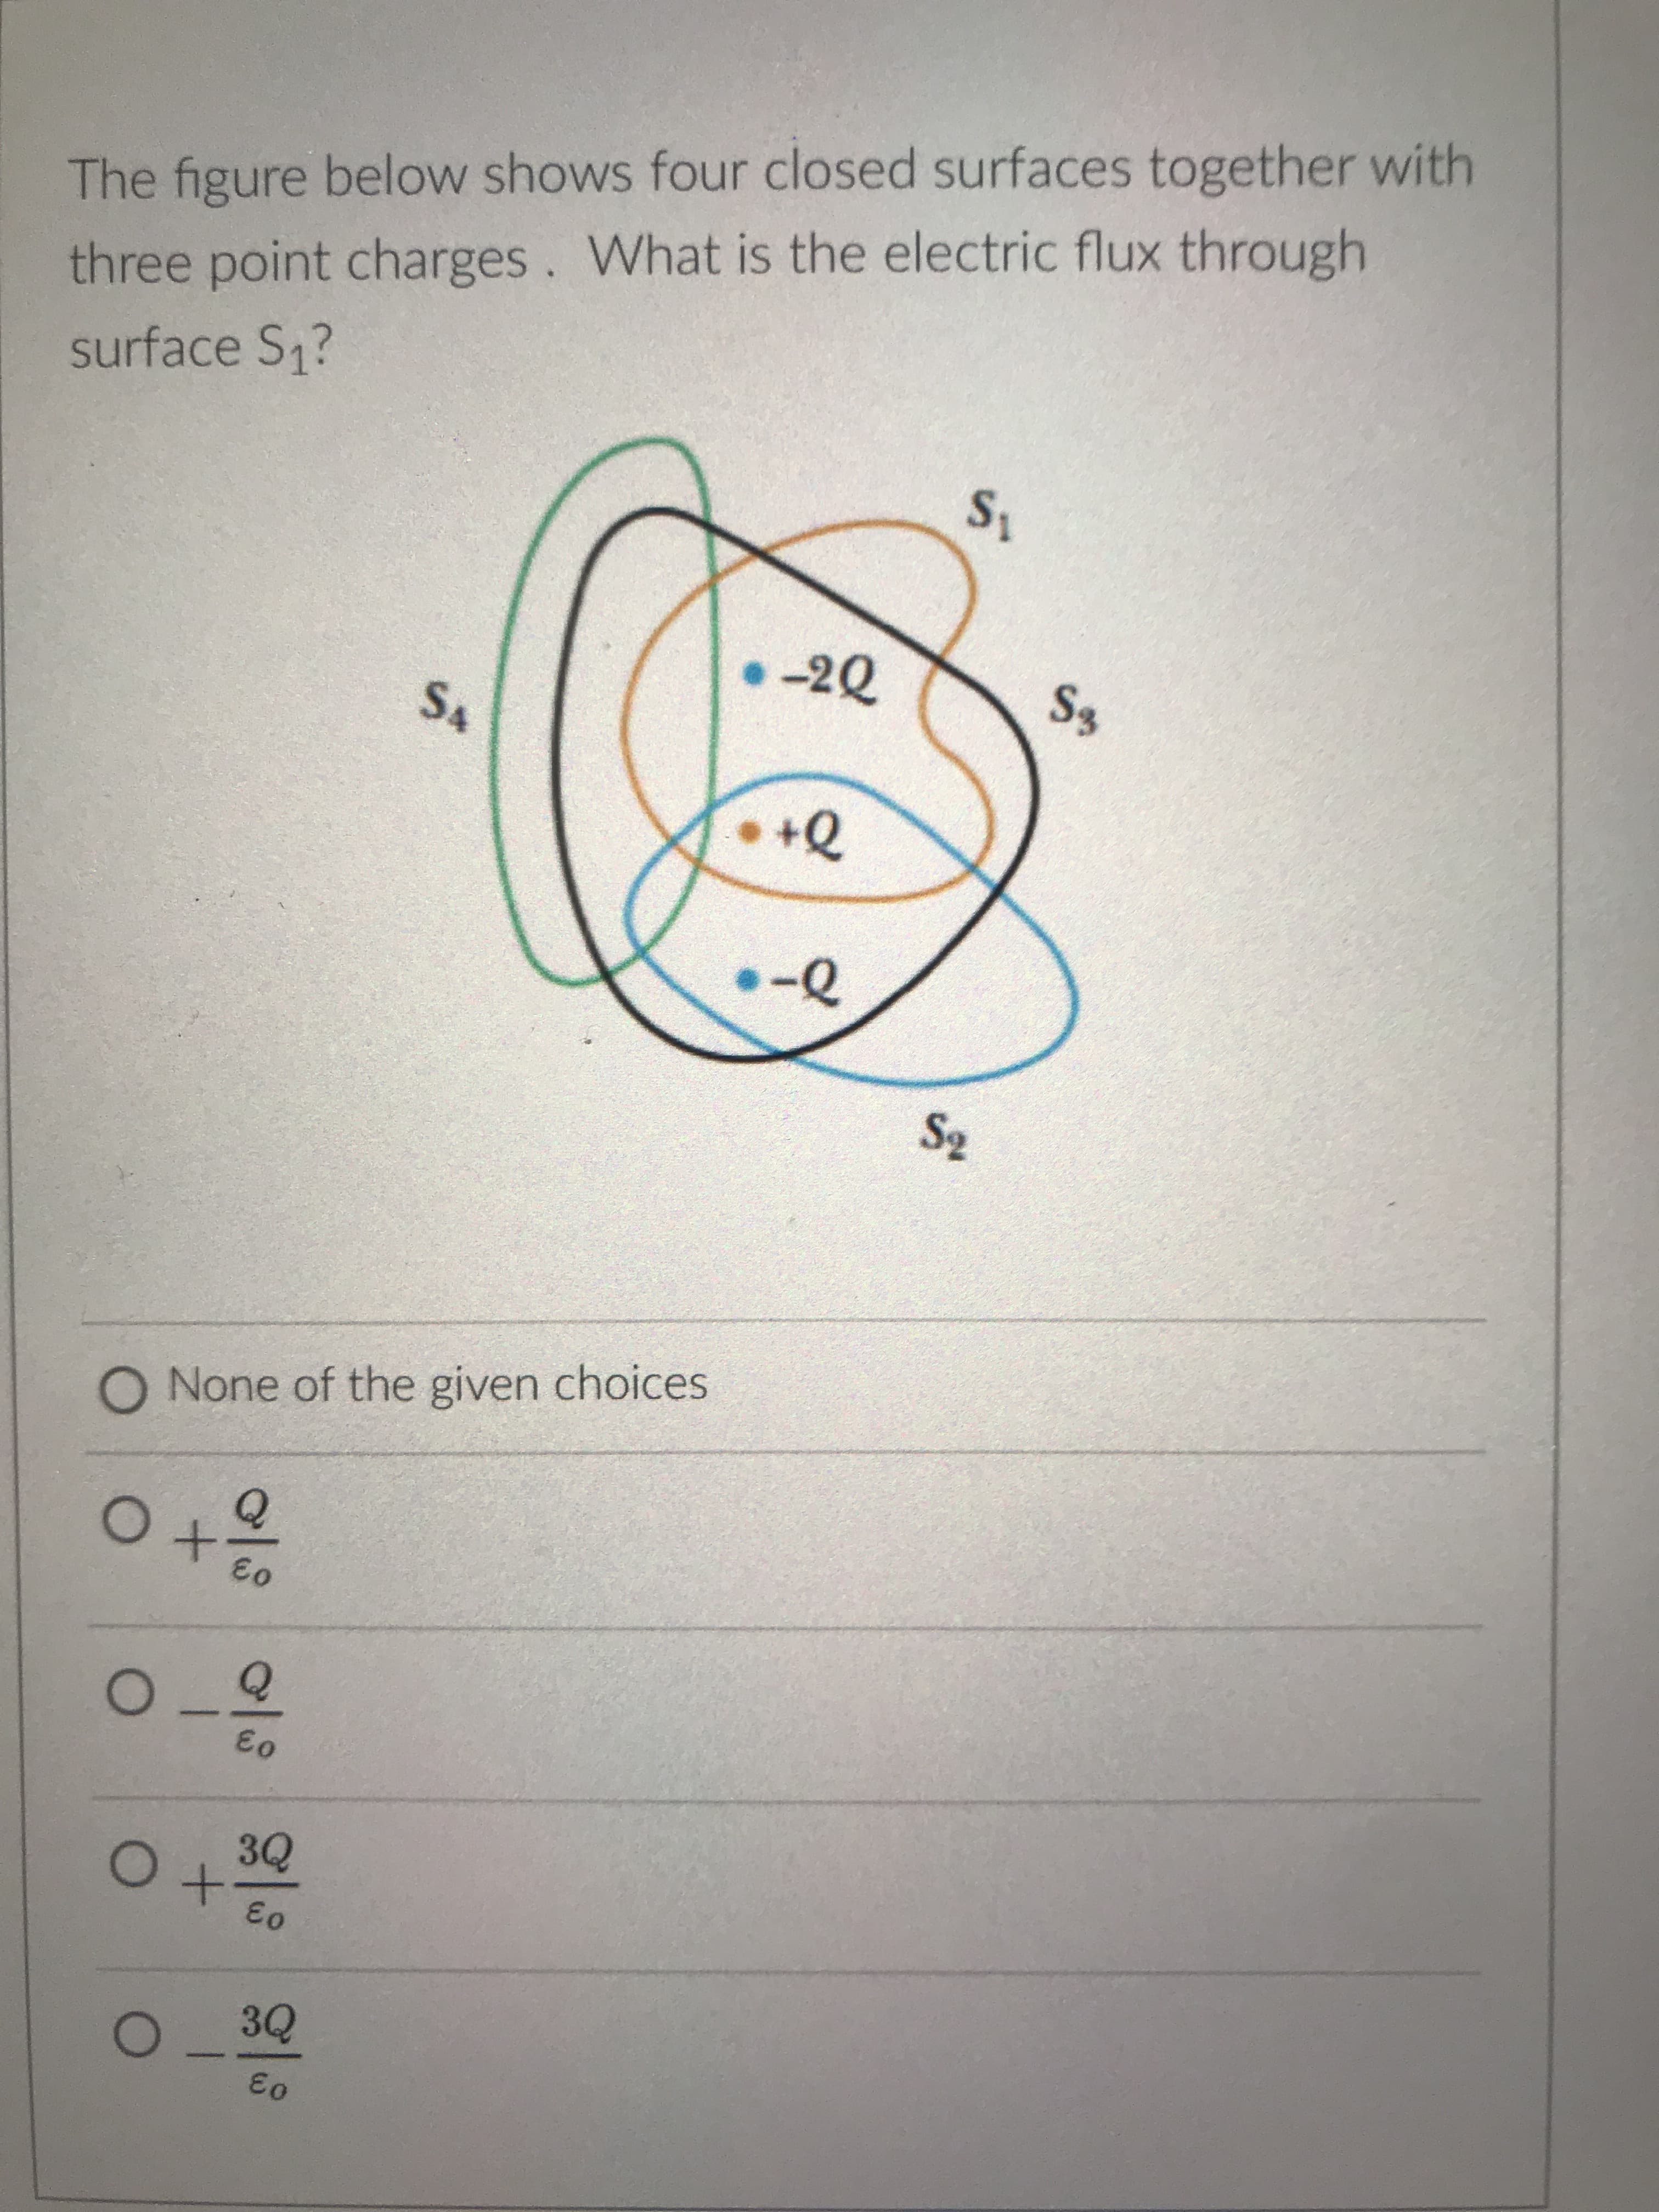 The figure below shows four closed surfaces together with
three point charges. What is the electric flux through
surface S1?
-2Q
+Q
O None of the given choices
to
03
0.
Eo
8o
8o
